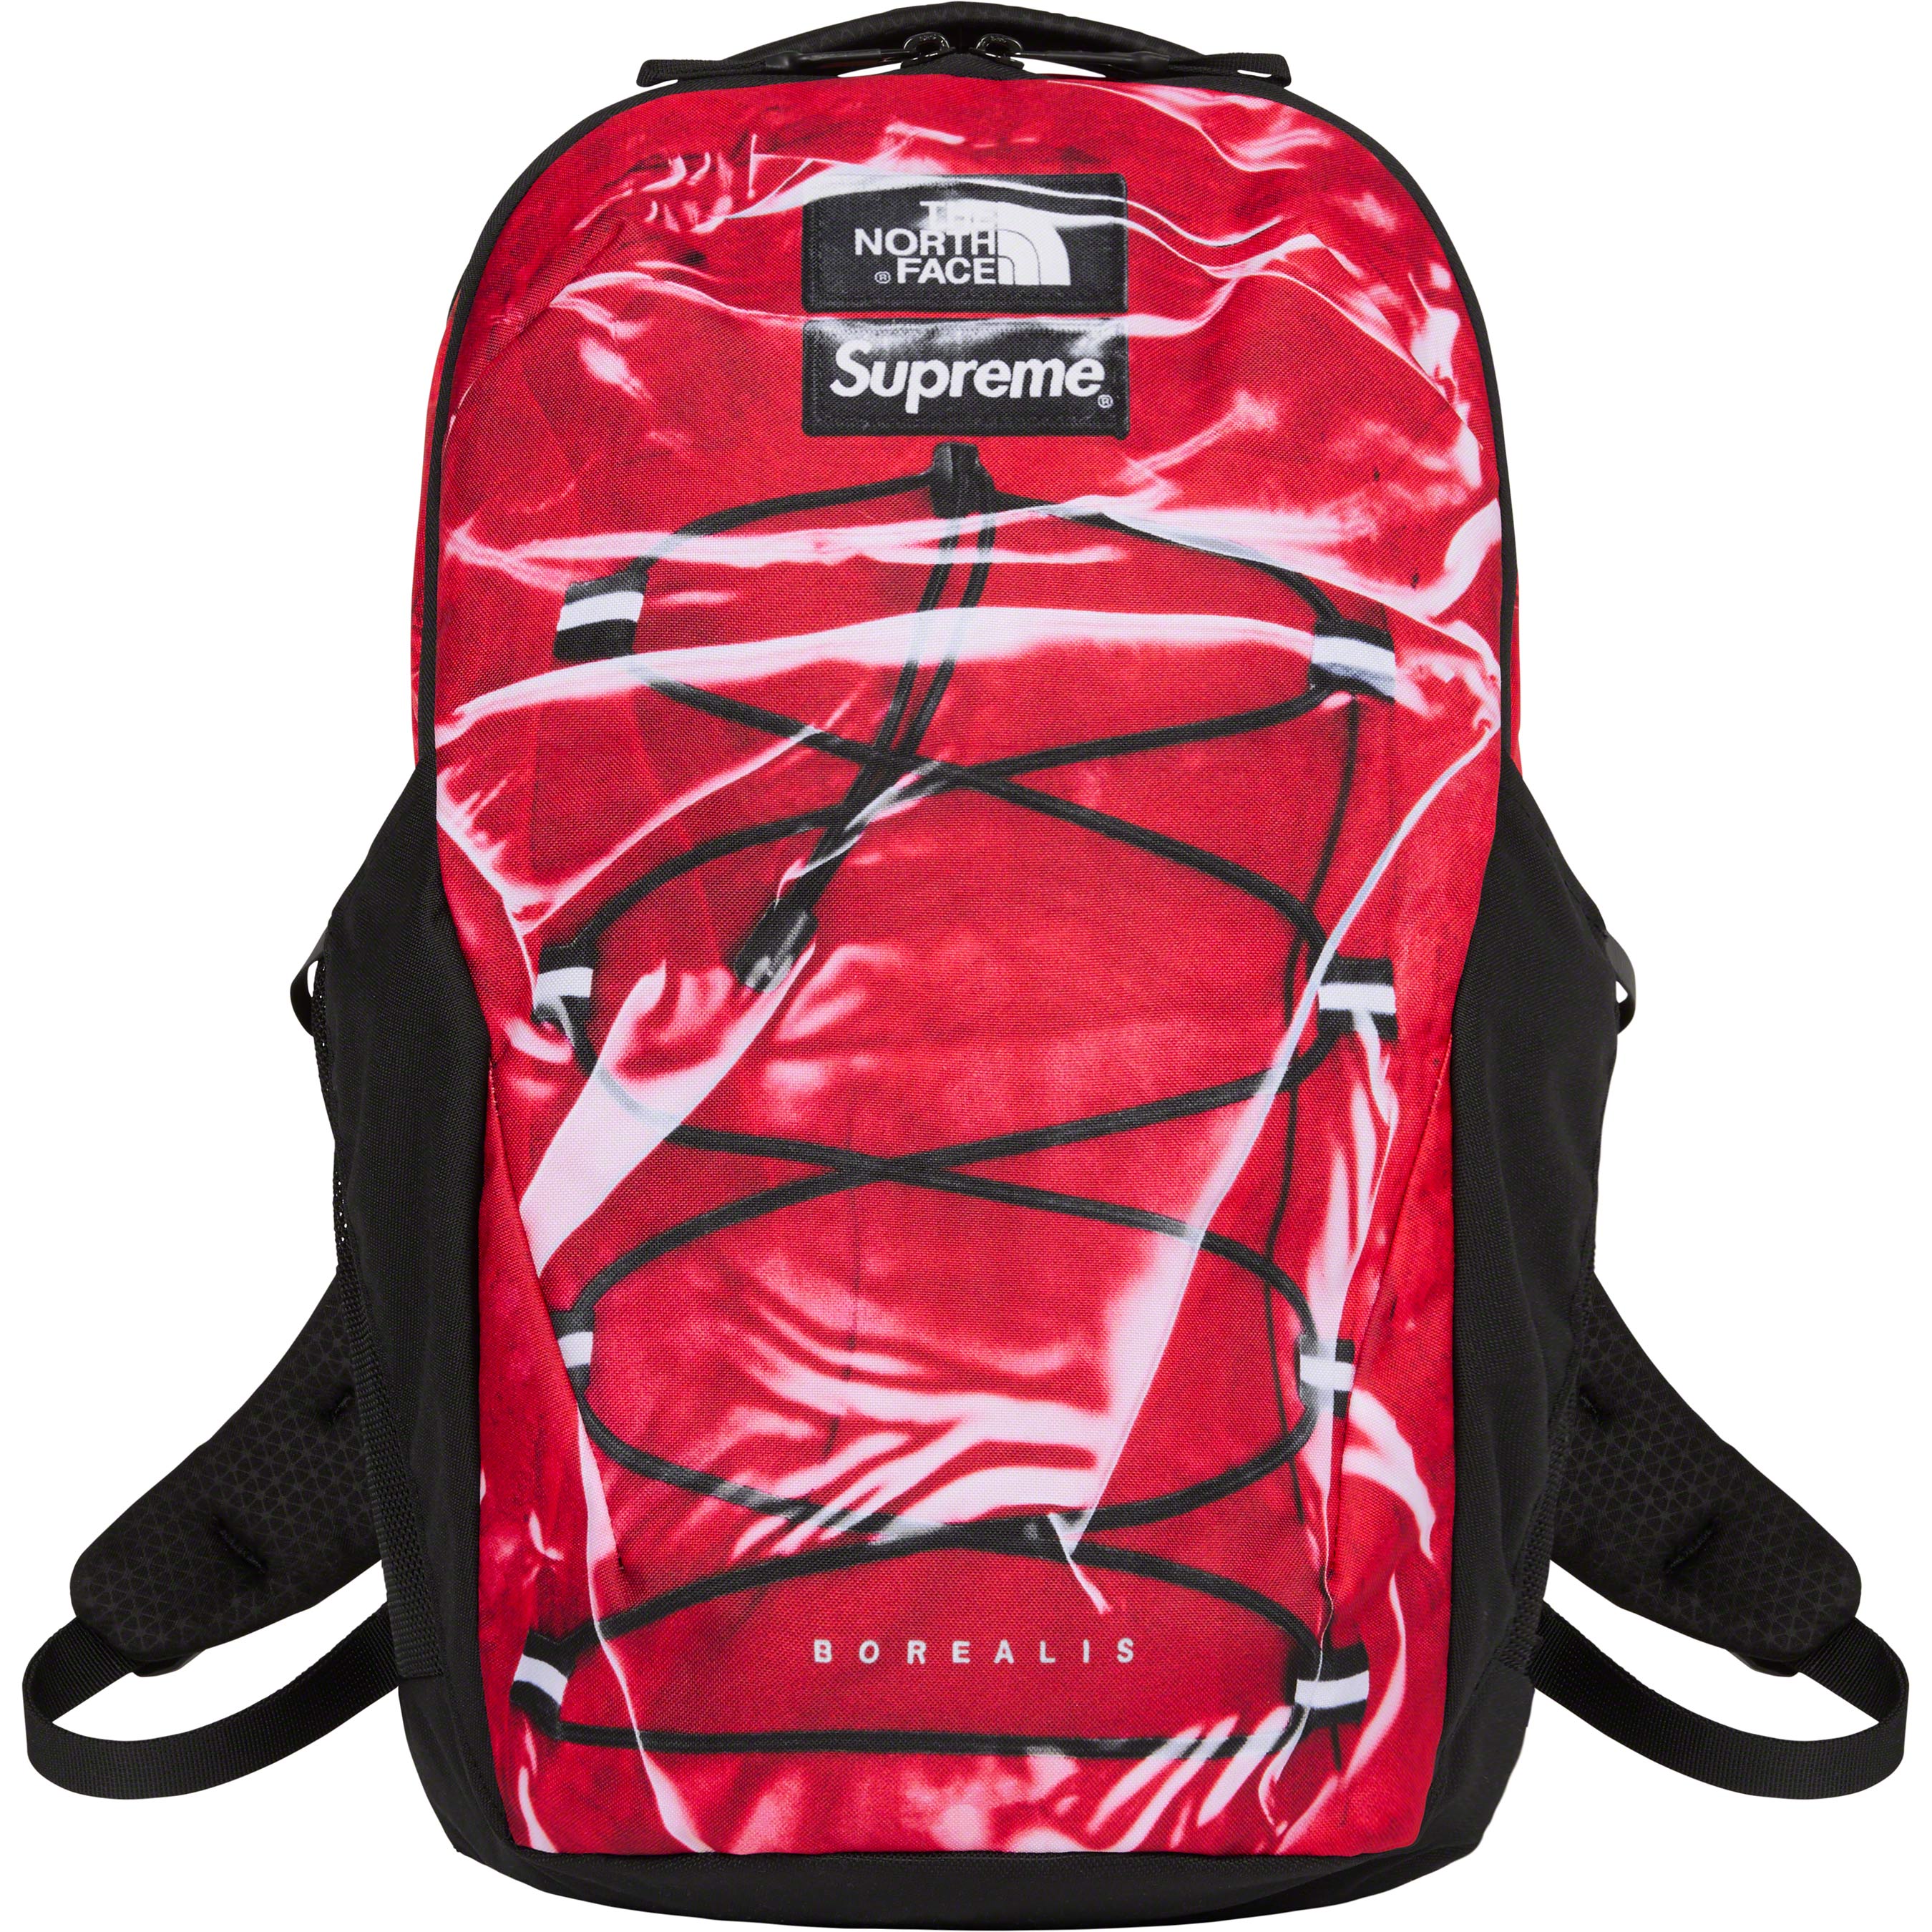 The North Face Trompe L'oeil Printed Borealis Backpack